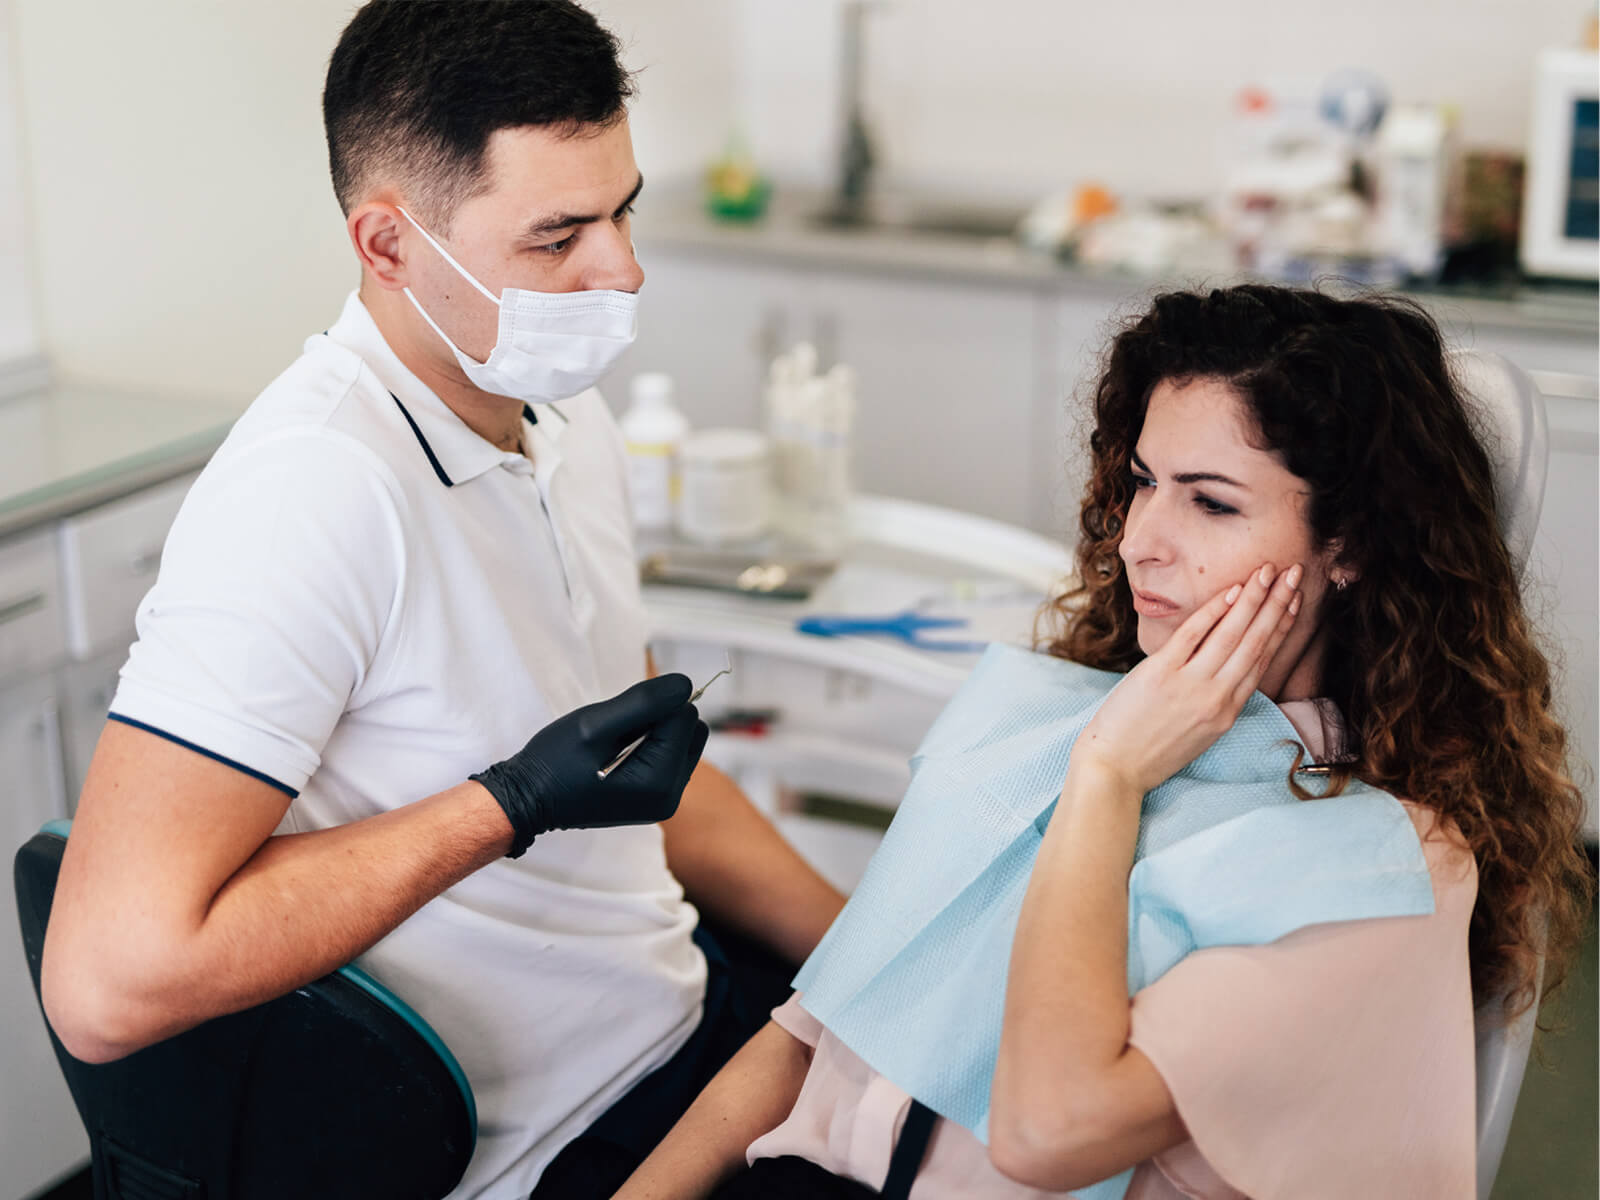 Emergency Wisdom Tooth Removal – Can It Be Done?